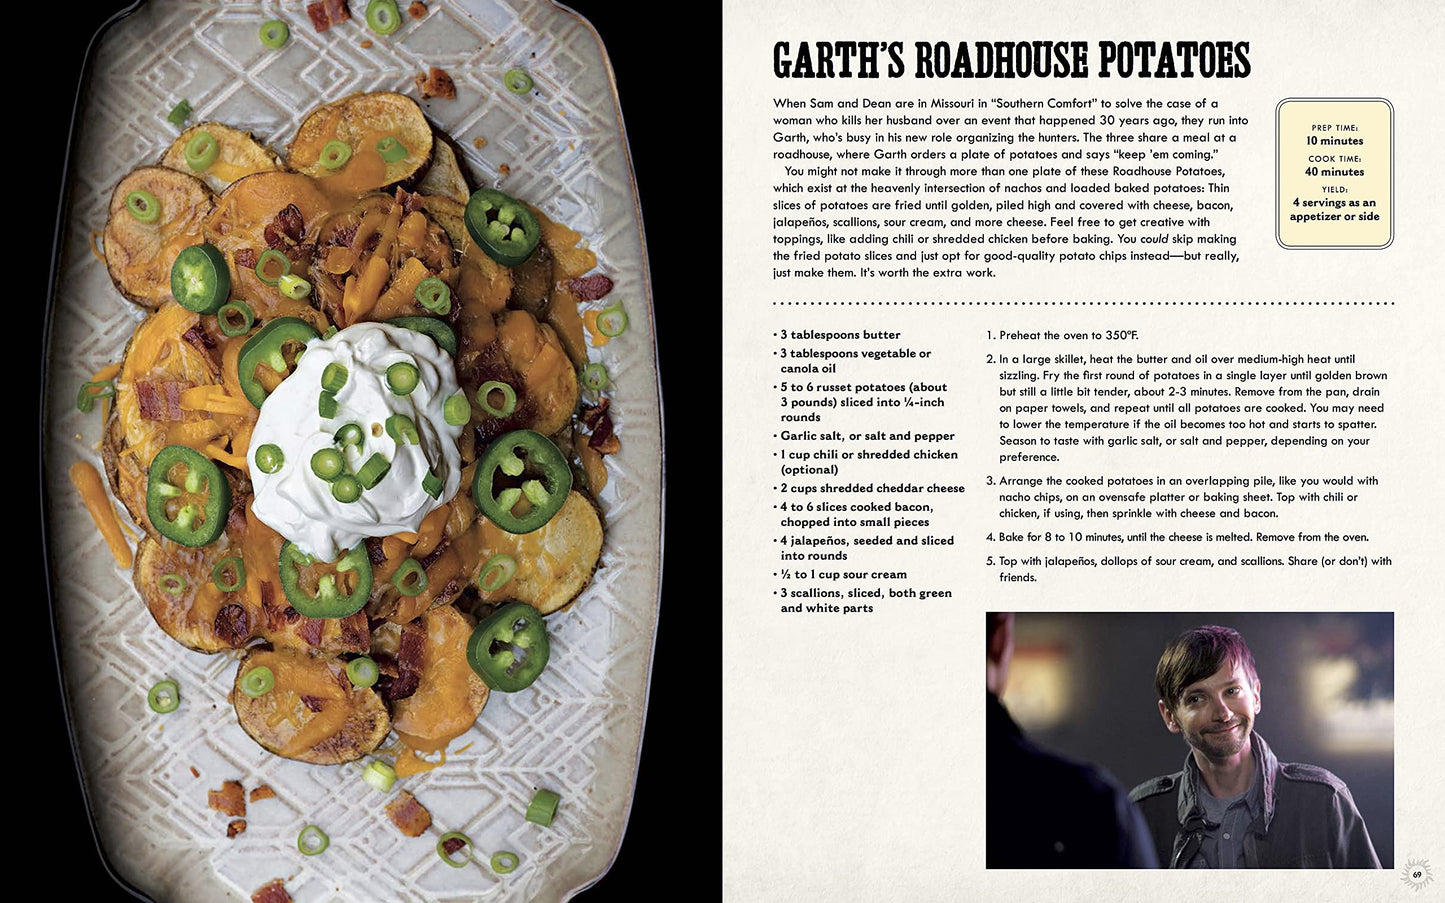 A two-page spread from the book. On the left is a plate of fried potaties with cheese, jalapeno peppers, bacon, and other toppings. On the right is a recipe for Garth's Roadhouse Potatoes.